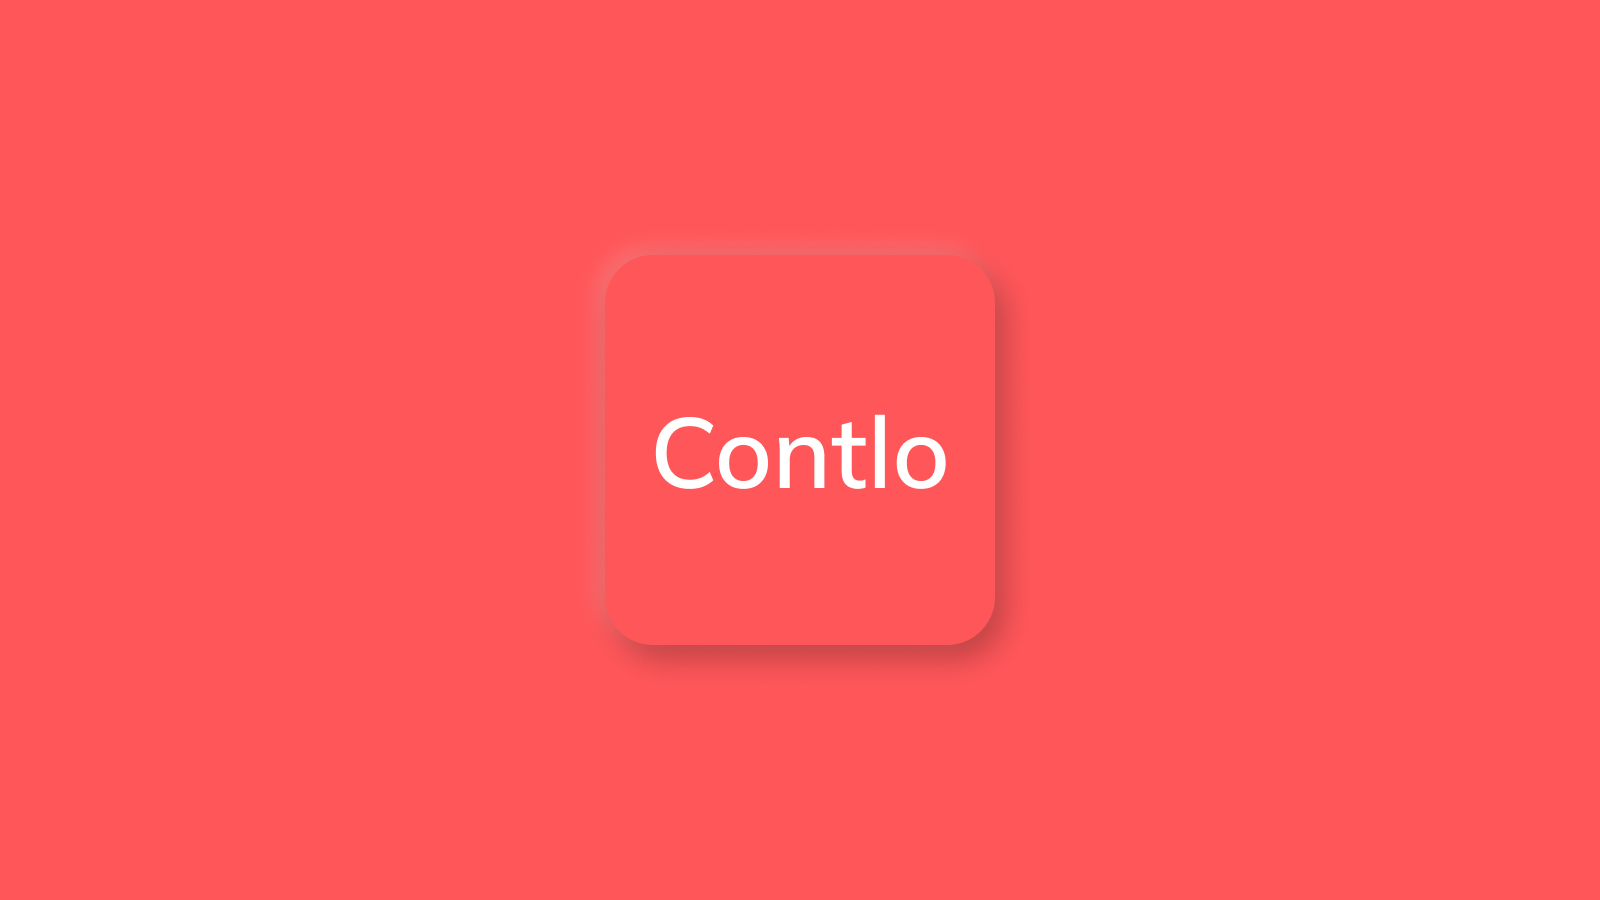 Ecommerce & D2C Enablement SaaS Platform Contlo raises $800,000 in pre-seed round